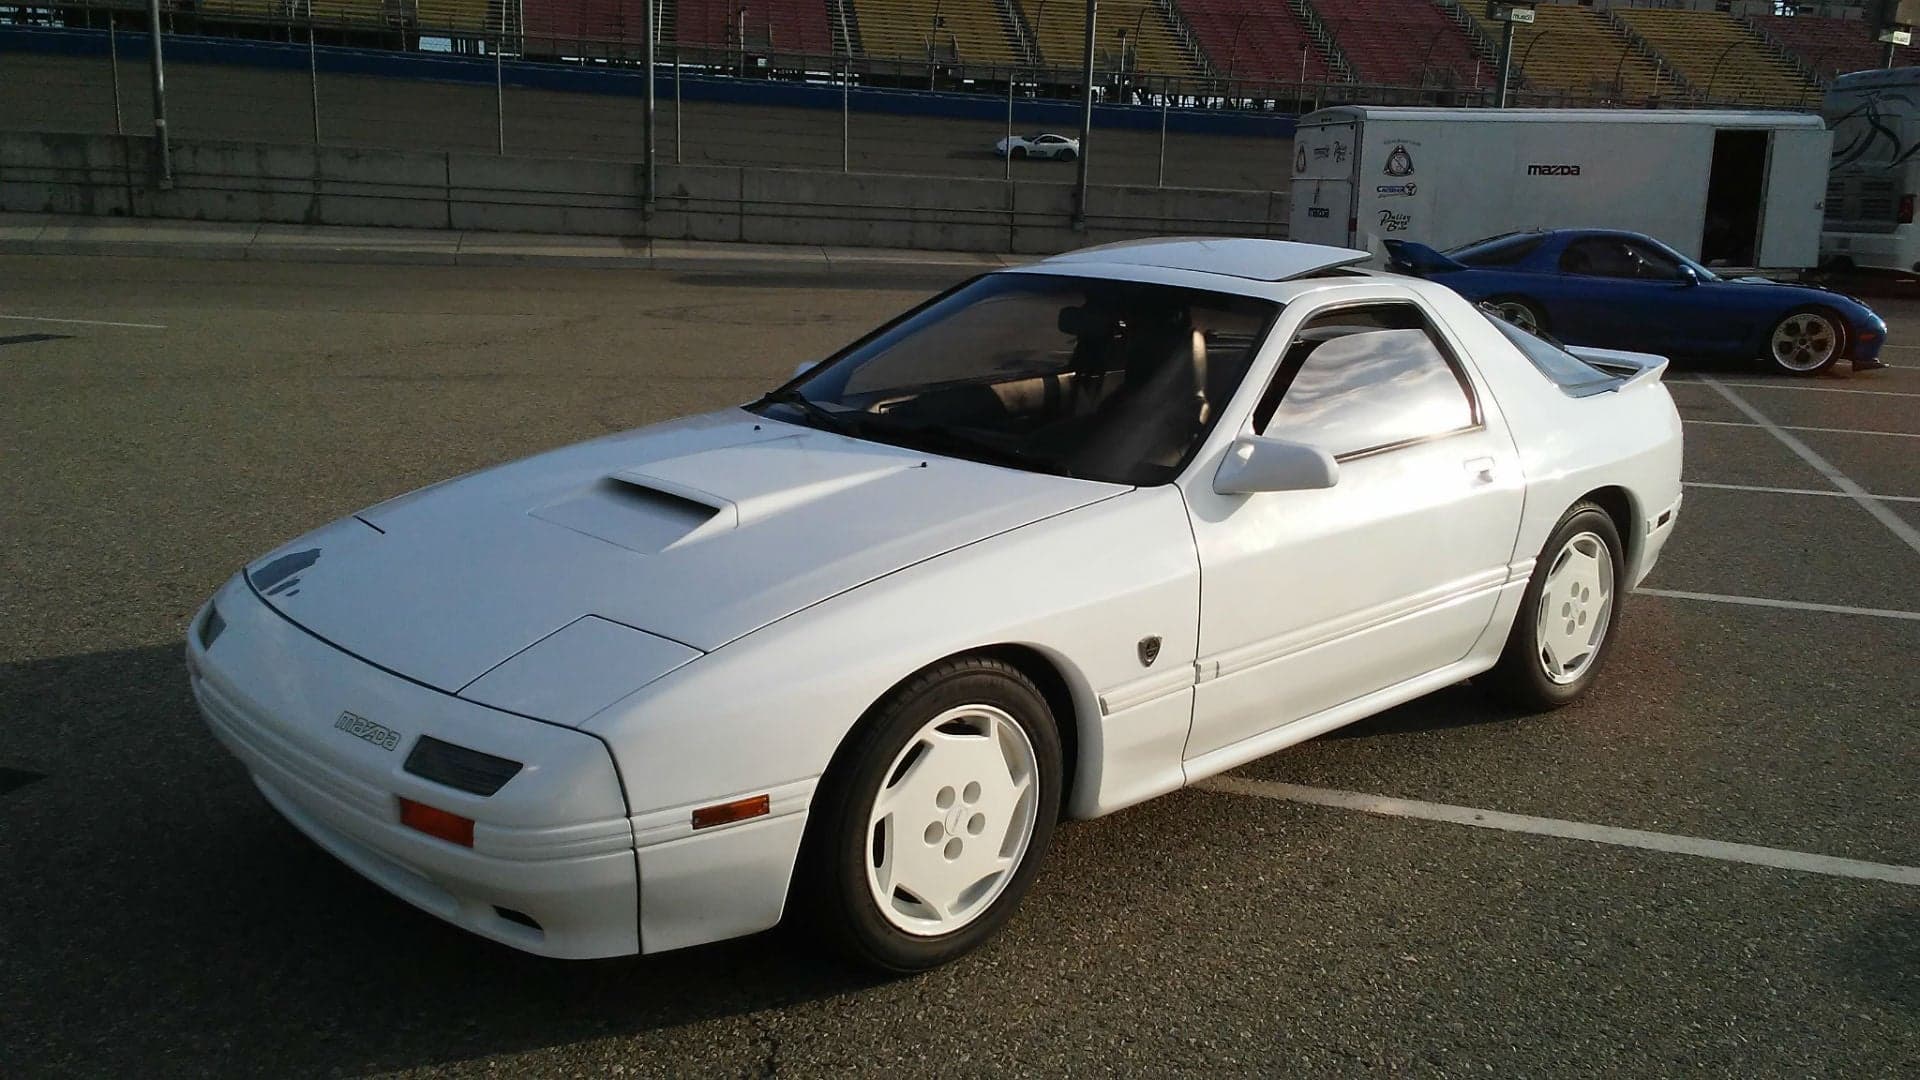 Limited Edition 1988 Mazda RX-7 Turbo 10th Anniversary for Sale